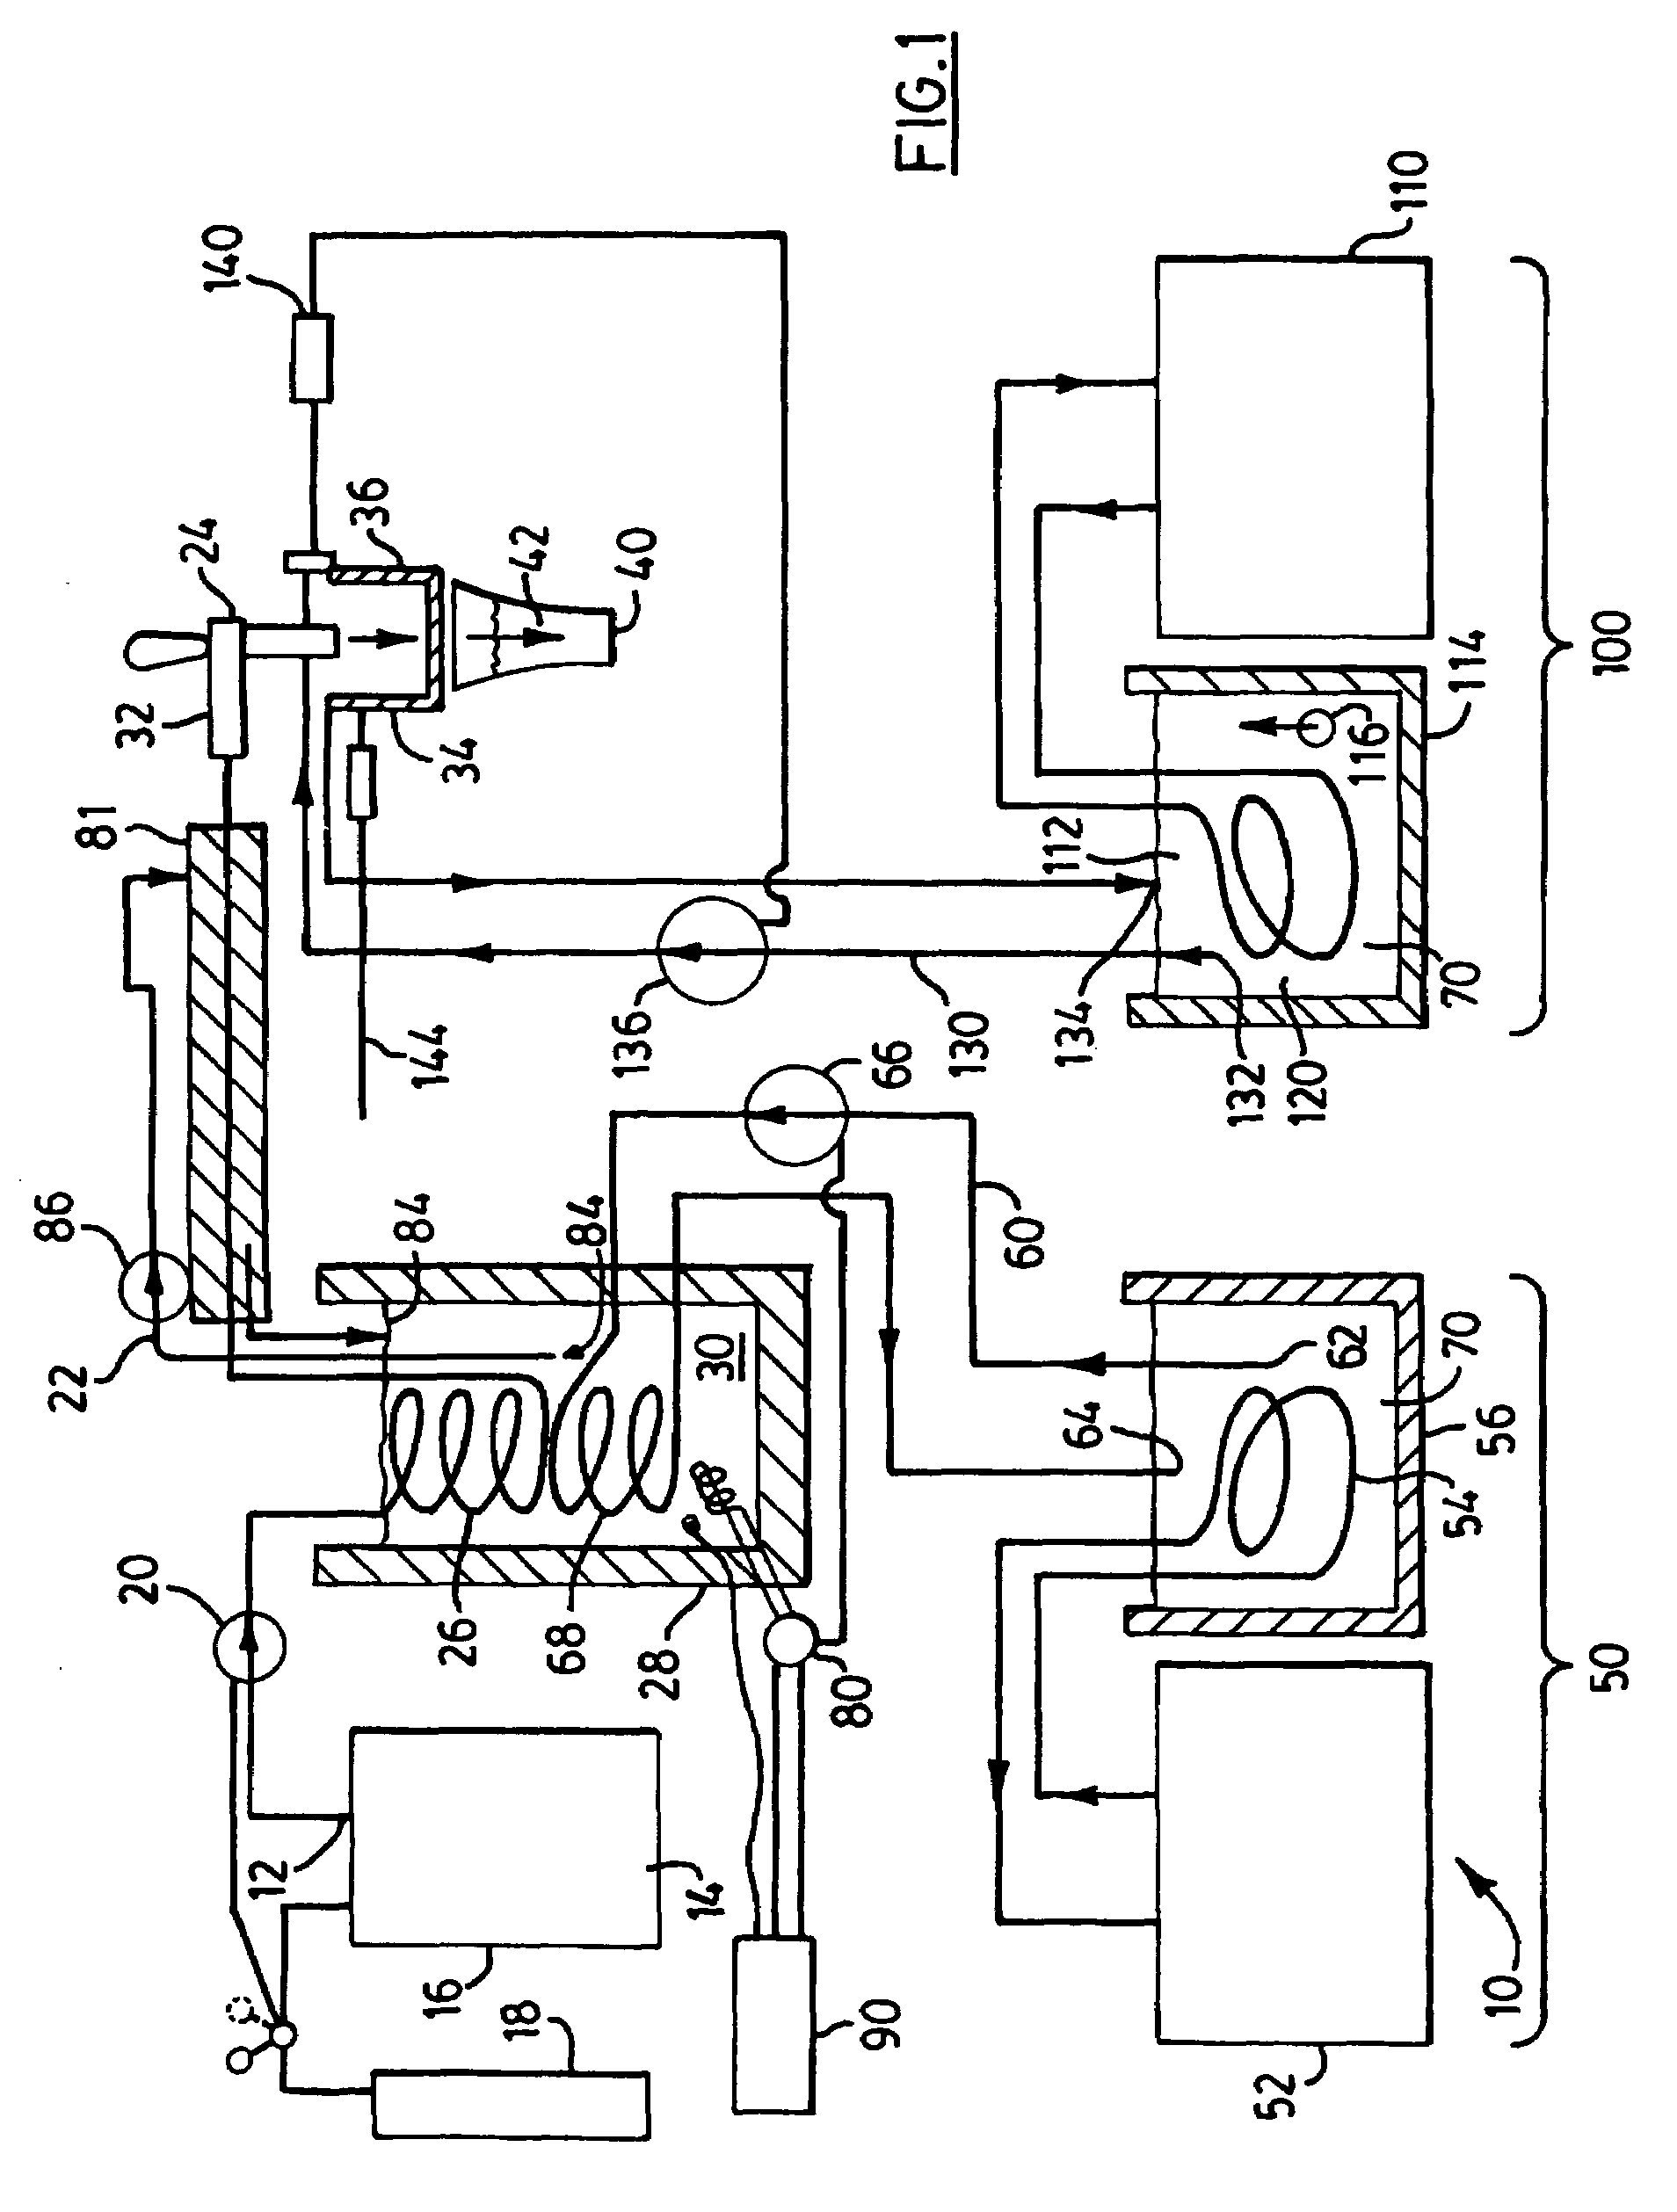 Method and apparatus for controlled ice crystal formation in a beverage